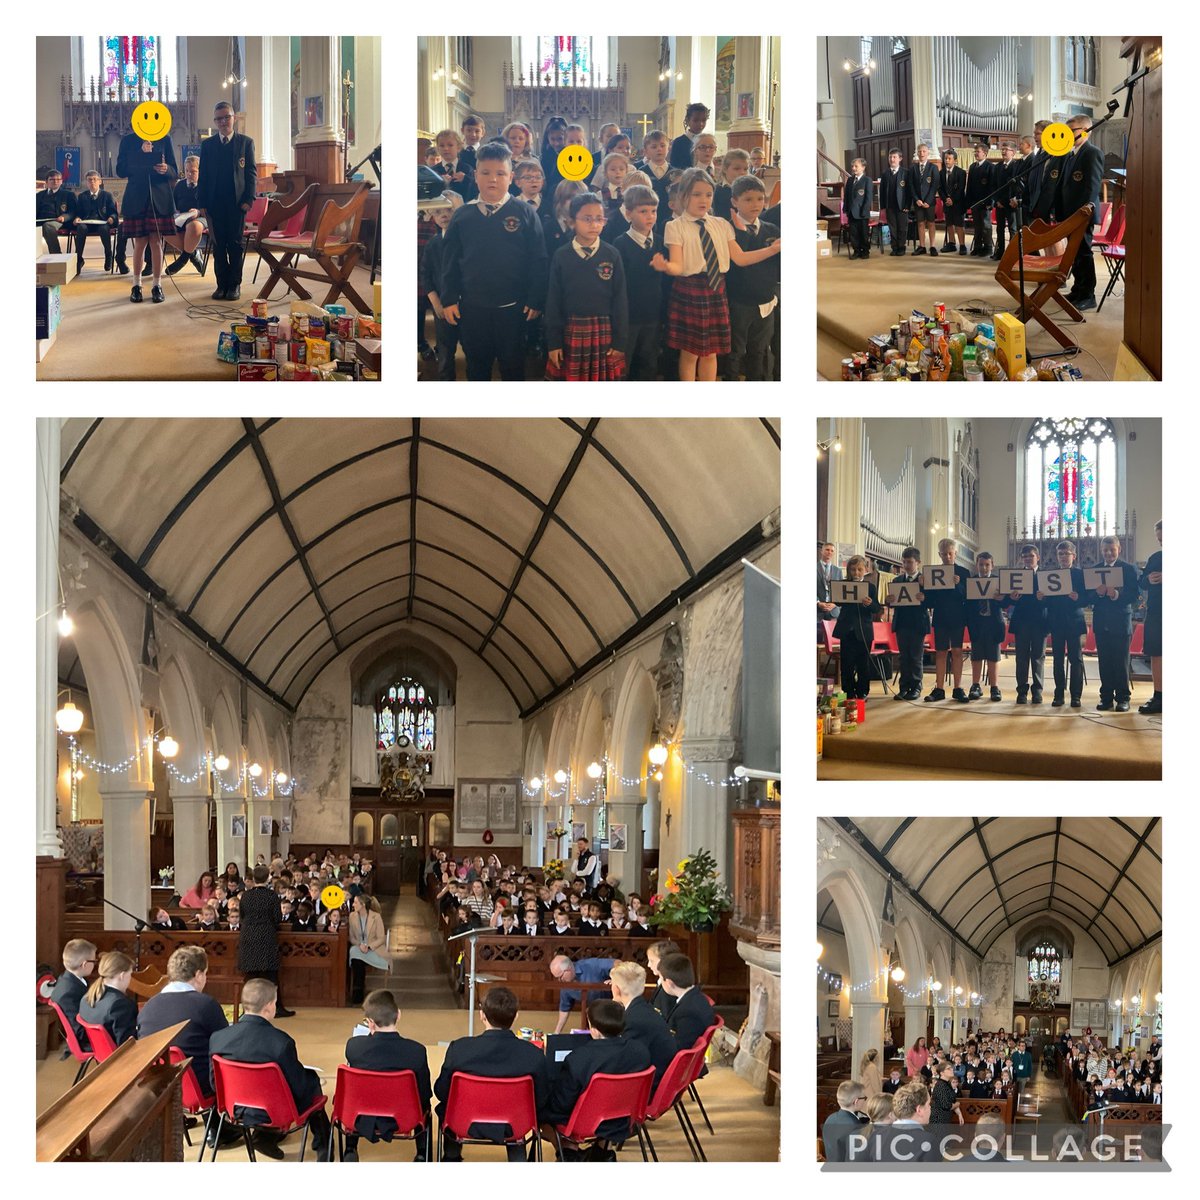 We had our annual Harvest Celebration at St Thomas Church. The children represented the school well and enjoyed the service. Thank you for all the food donations.